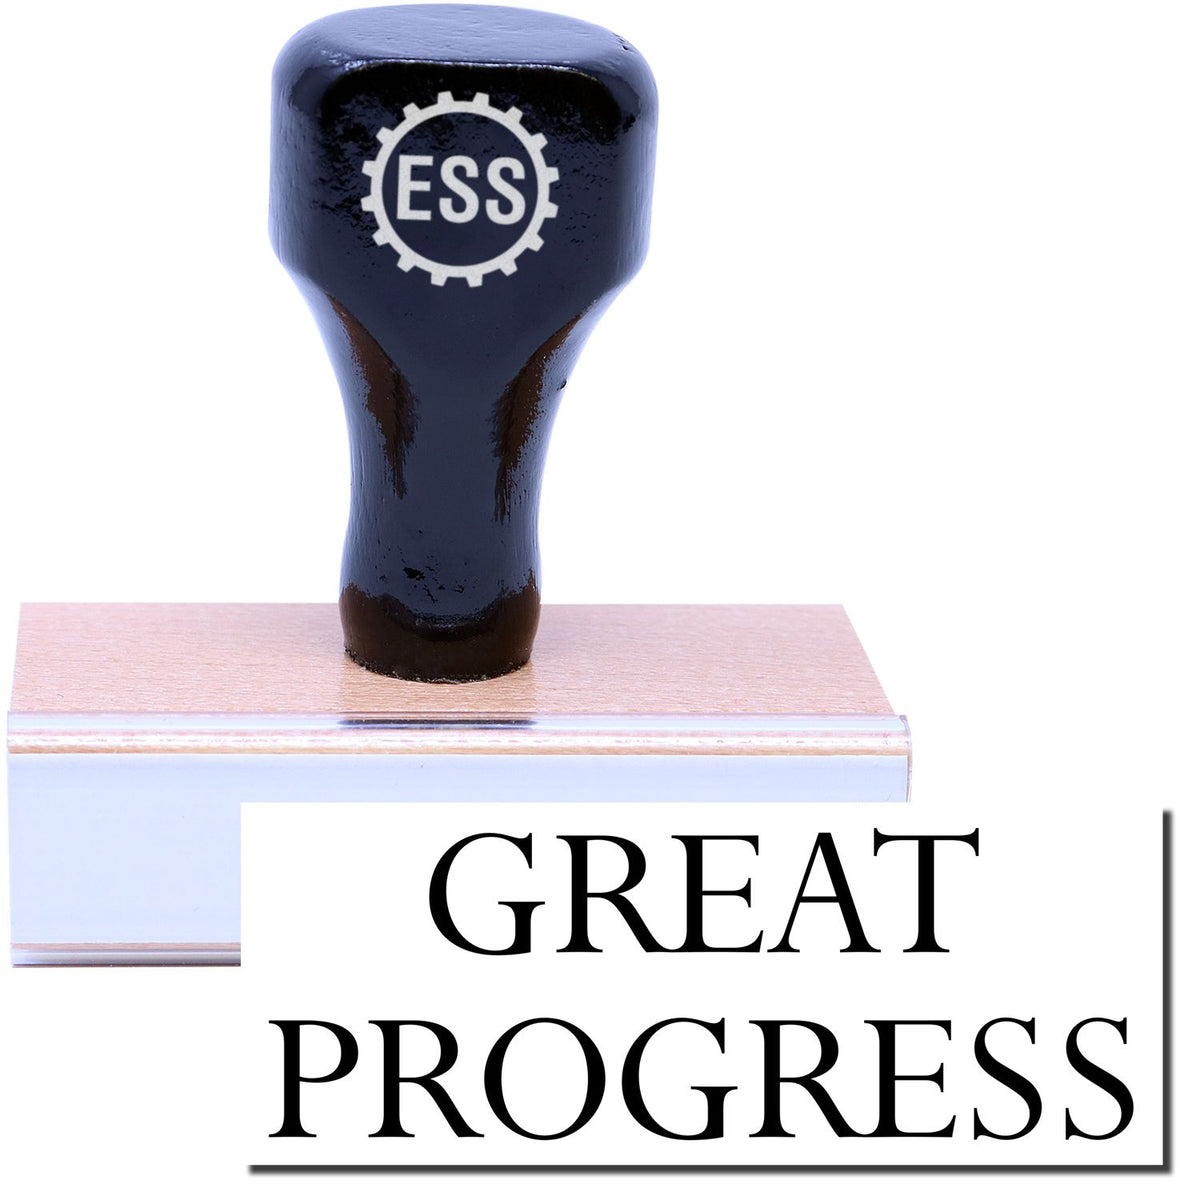 A stock office rubber stamp with a stamped image showing how the text &quot;GREAT PROGRESS&quot; is displayed after stamping.